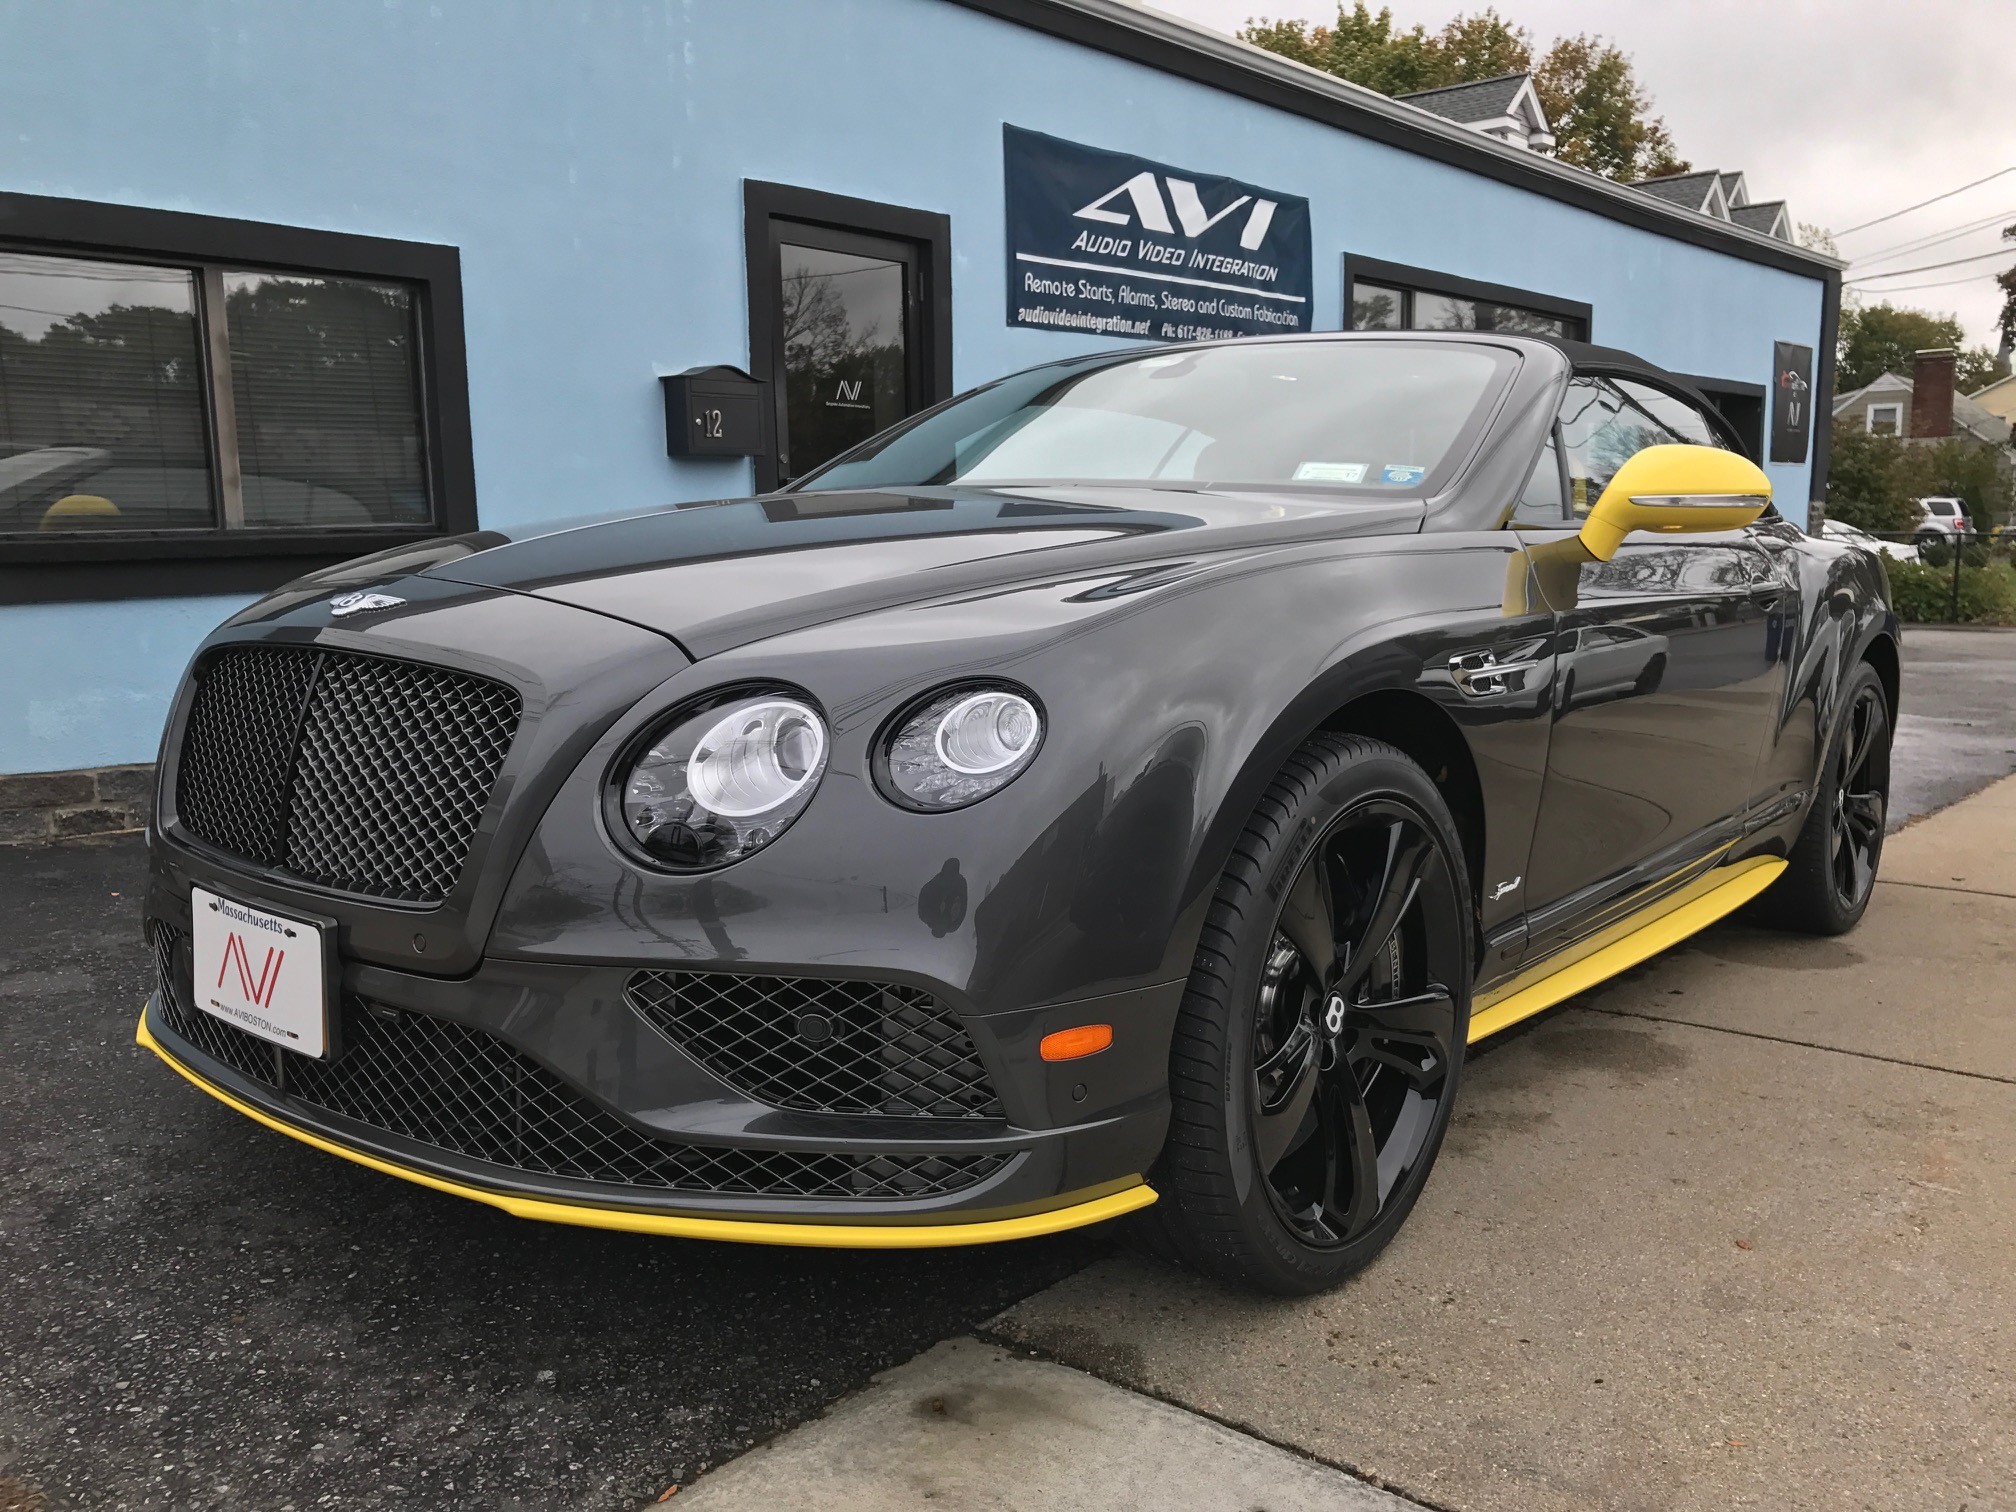 Custom K40 Police Laser Jammers and Hidden Radar Receiver Front Installed on 2016 Bentley GTC Speed Breitling Edition in Newton, MA